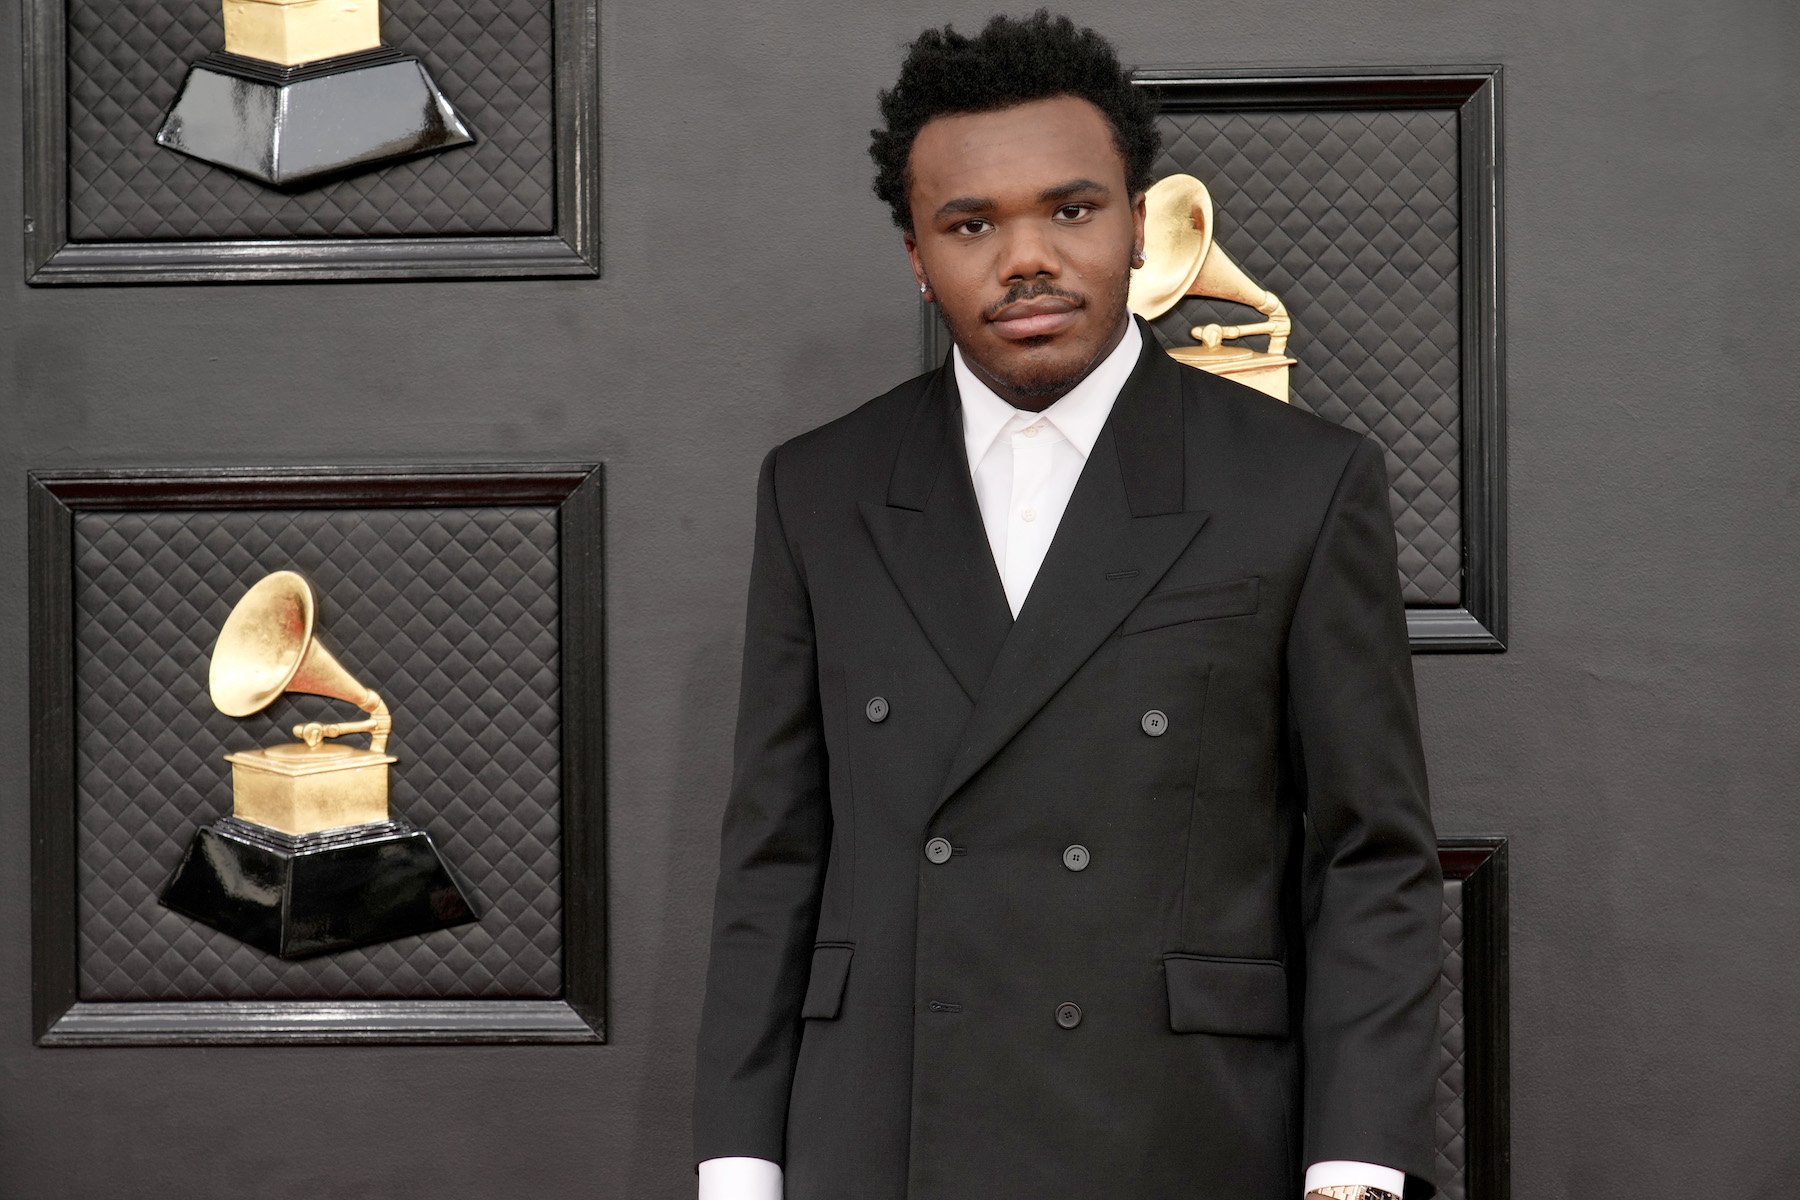 Baby Keem and Kendrick Lamar win Best Rap Performance at the 2022 Grammys